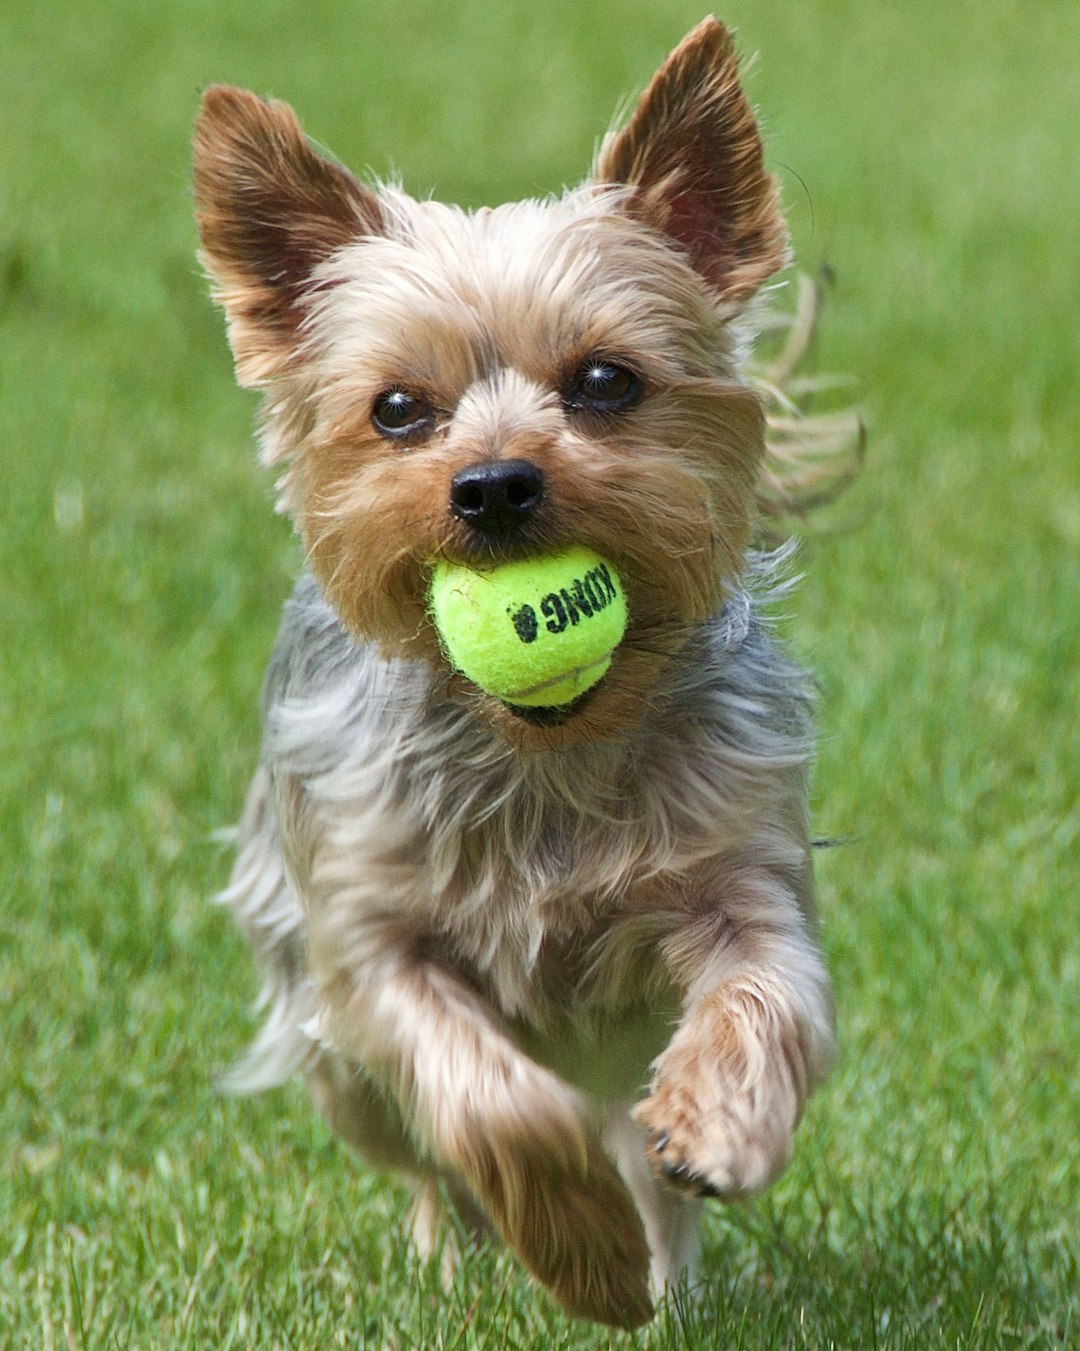 brown and black yorkshire terrier puppy playing green tennis ball on green grass field during daytime